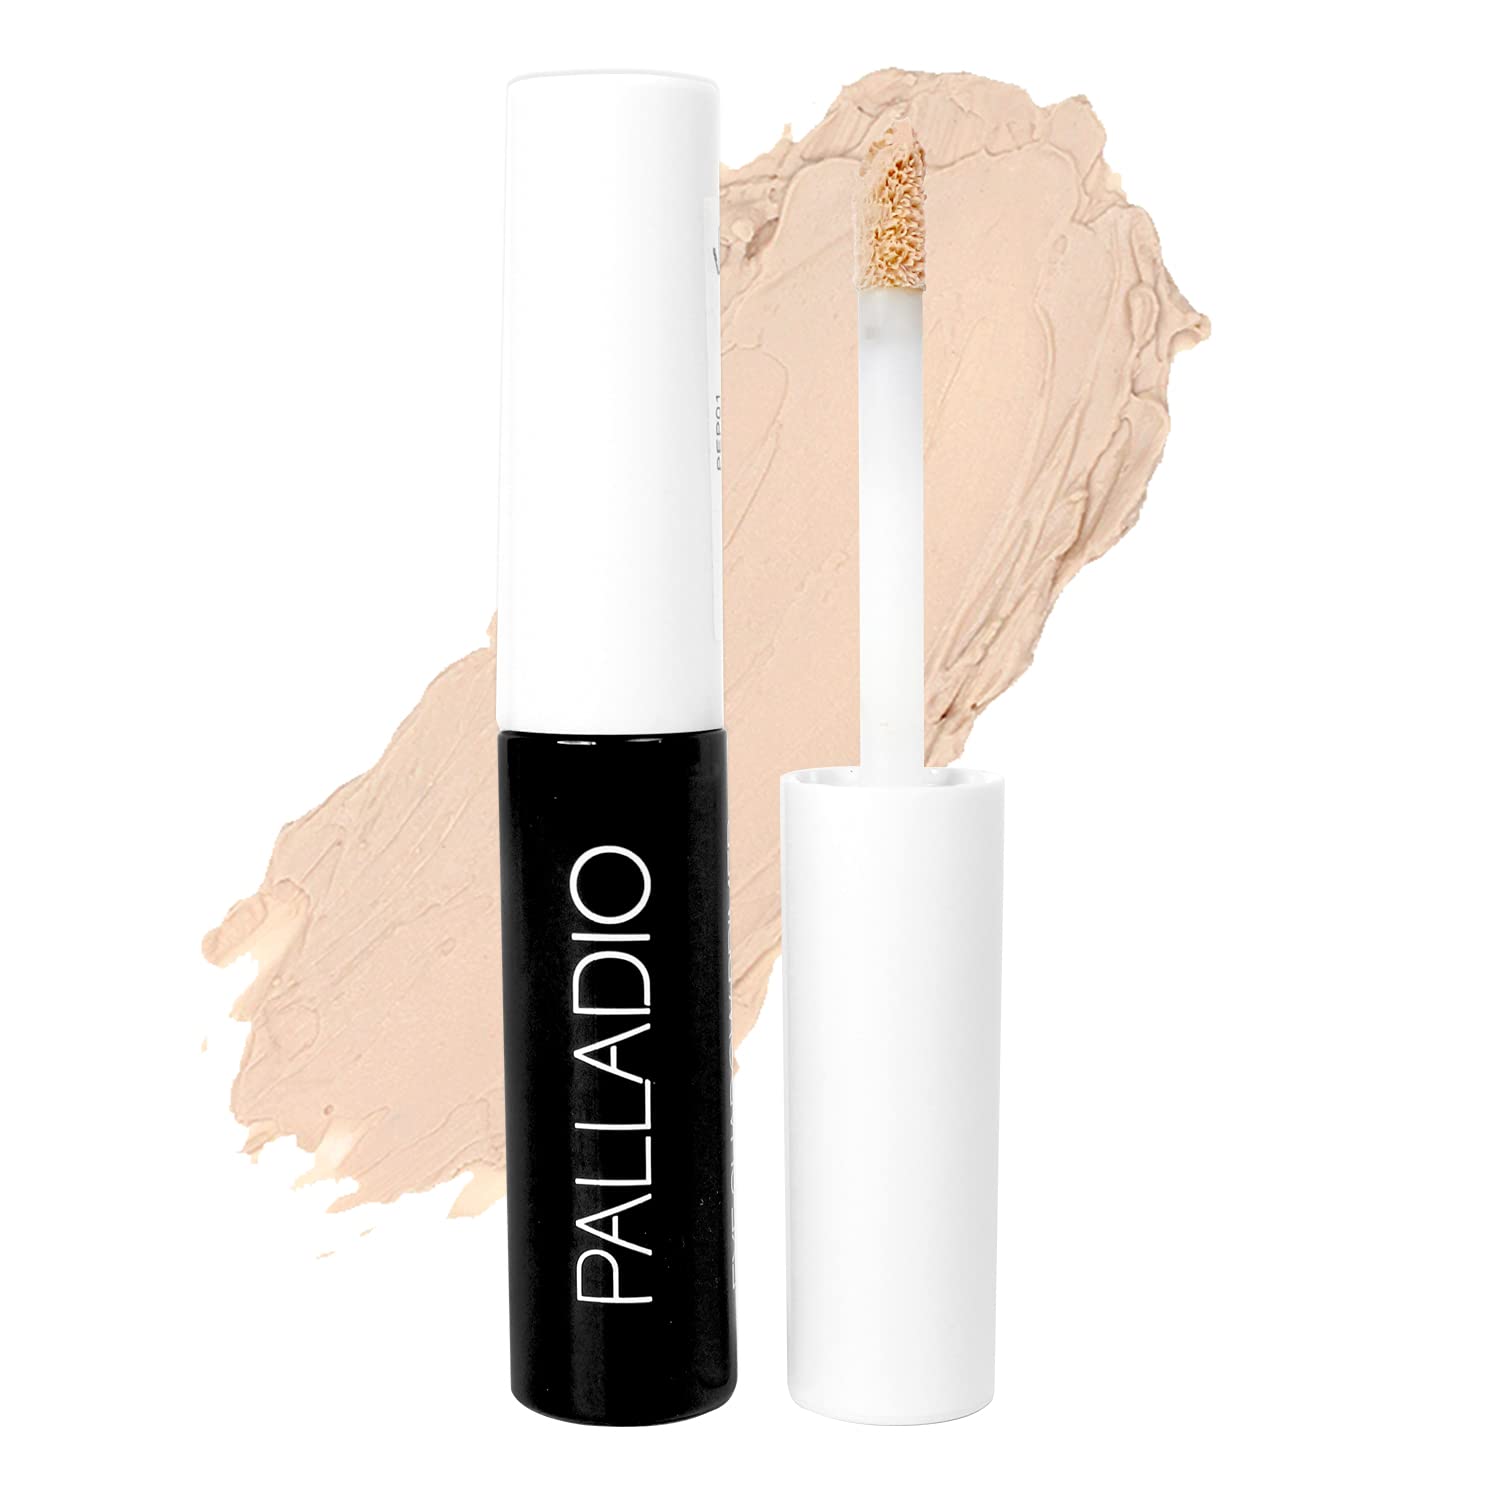 Palladio Eyeshadow Primer, Eliminates Creasing, Ensures Maximum Shadow Vibrancy All Day Long, Enhanced with 5 Different Herbal Extracts, Instantly Vanishing Sheer Finish, Easy Application with Wand